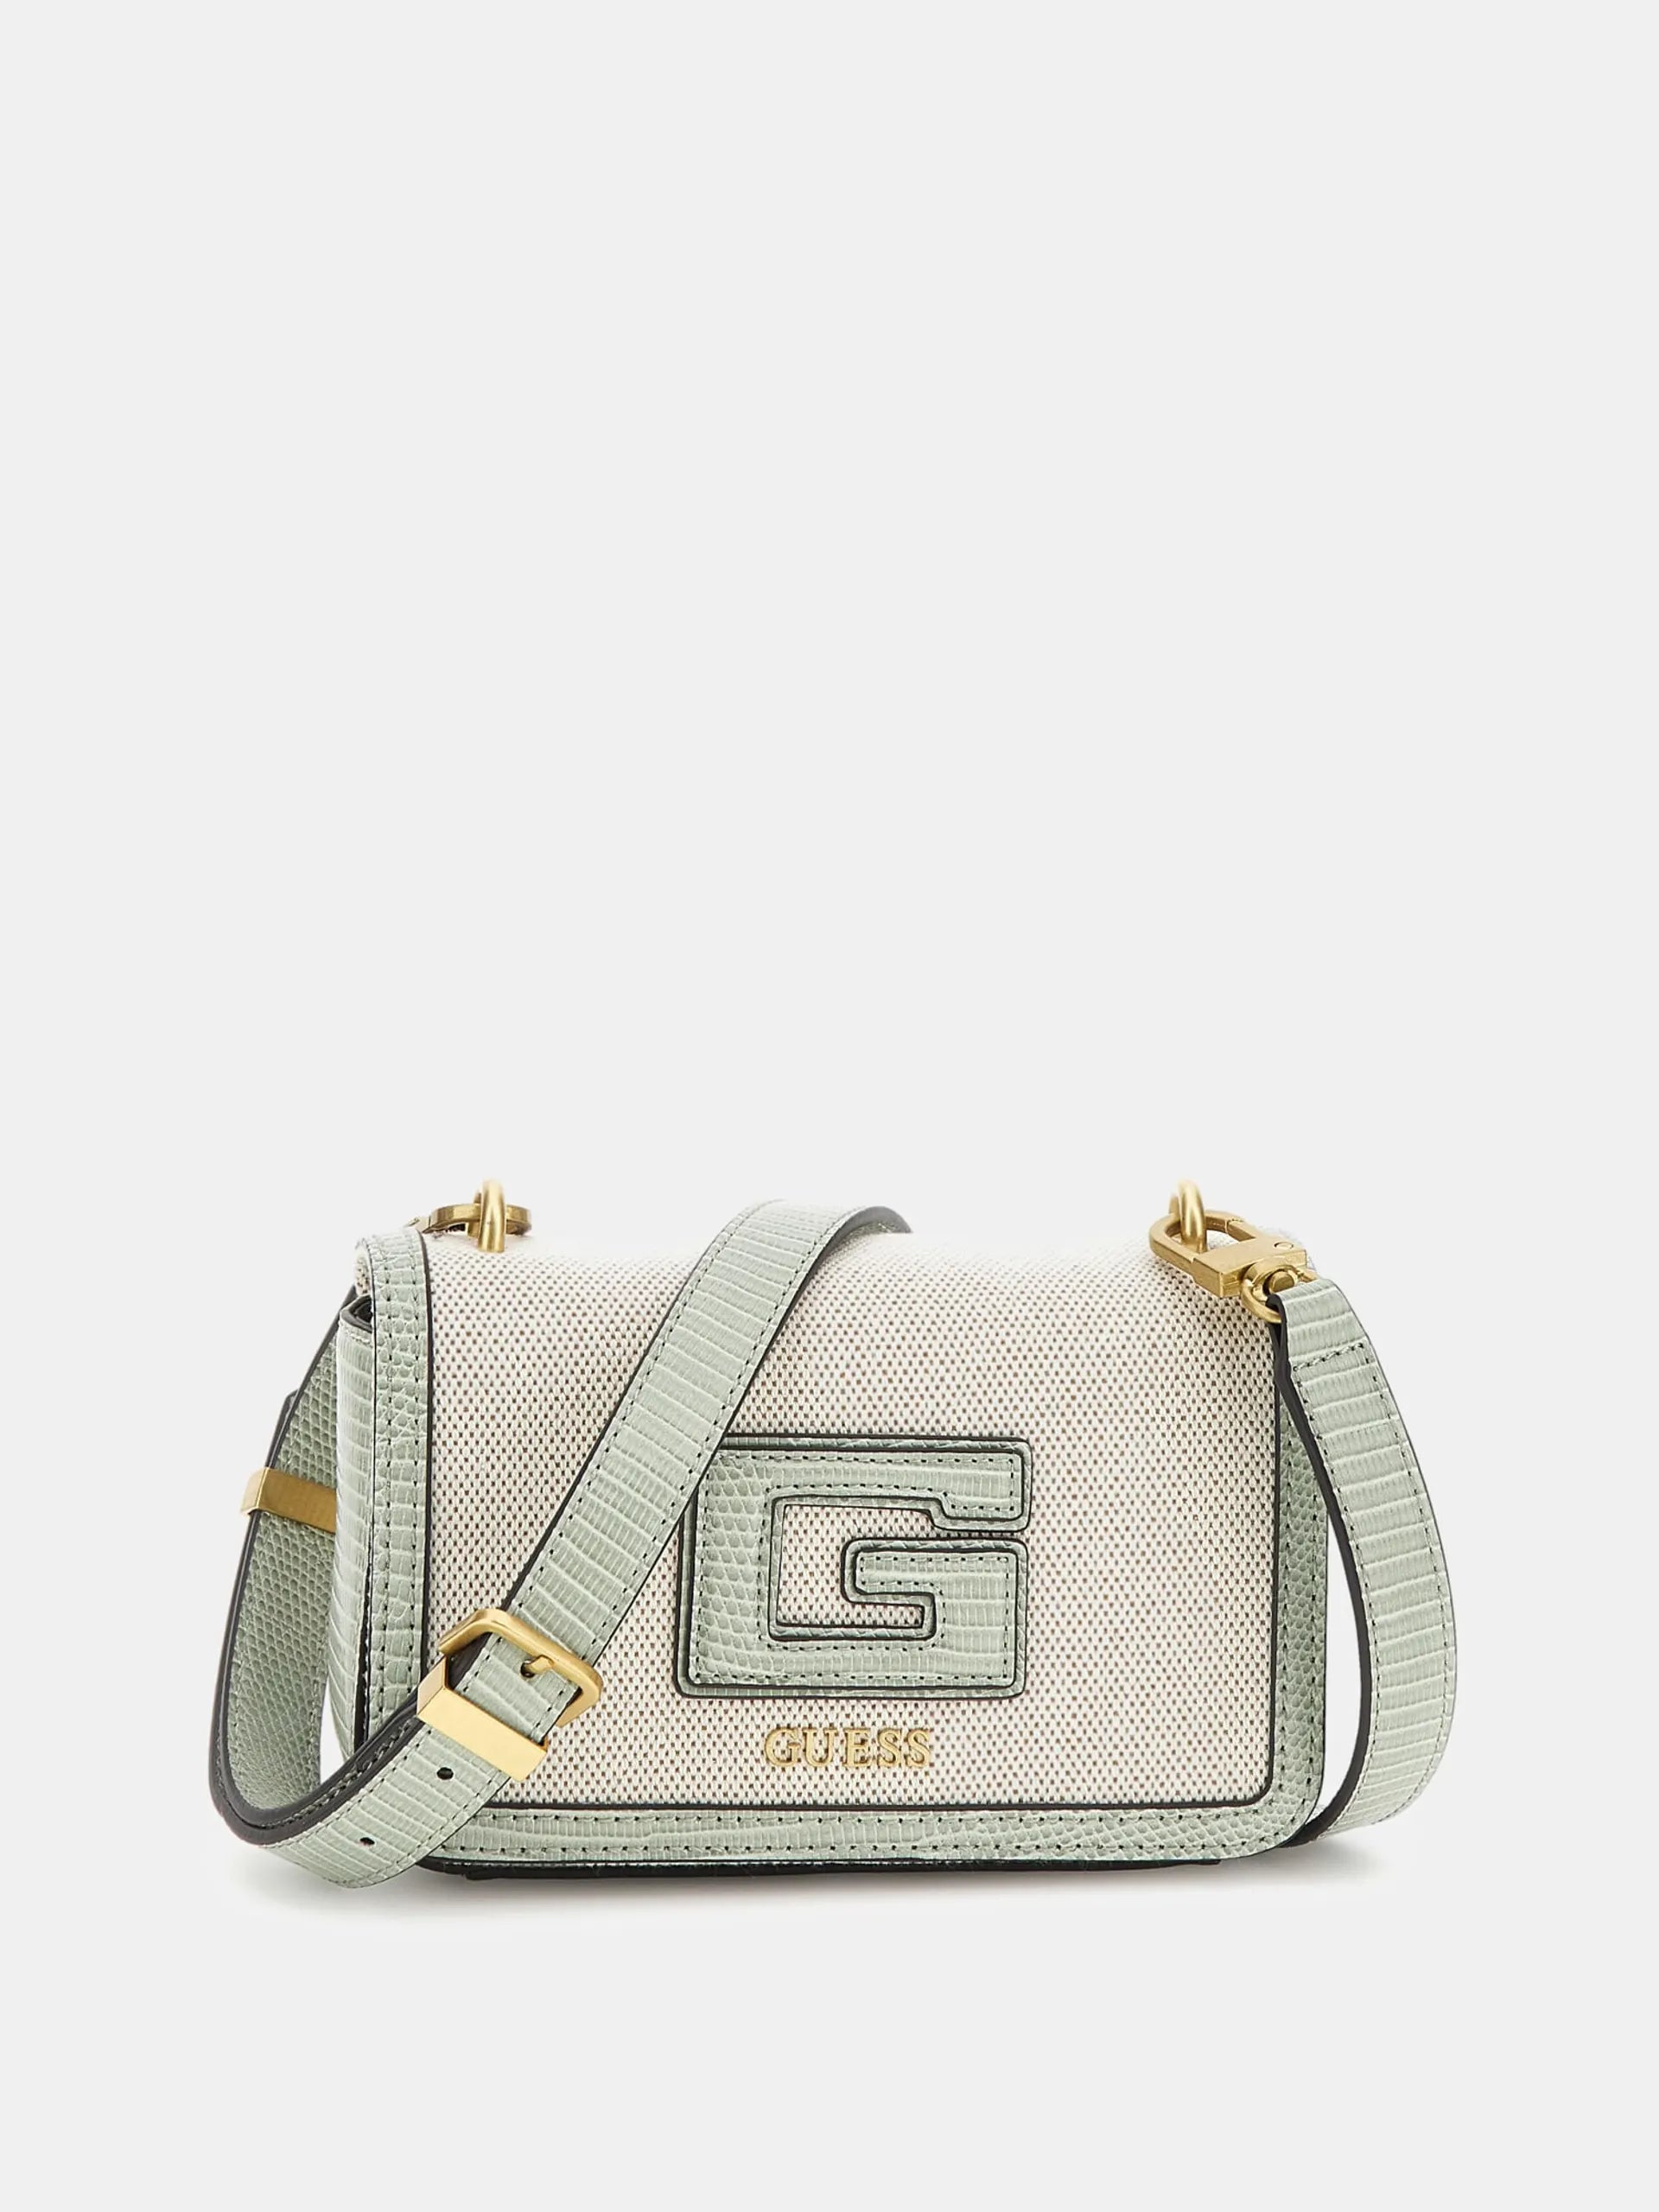 GUESS Bags for Women - Vestiaire Collective